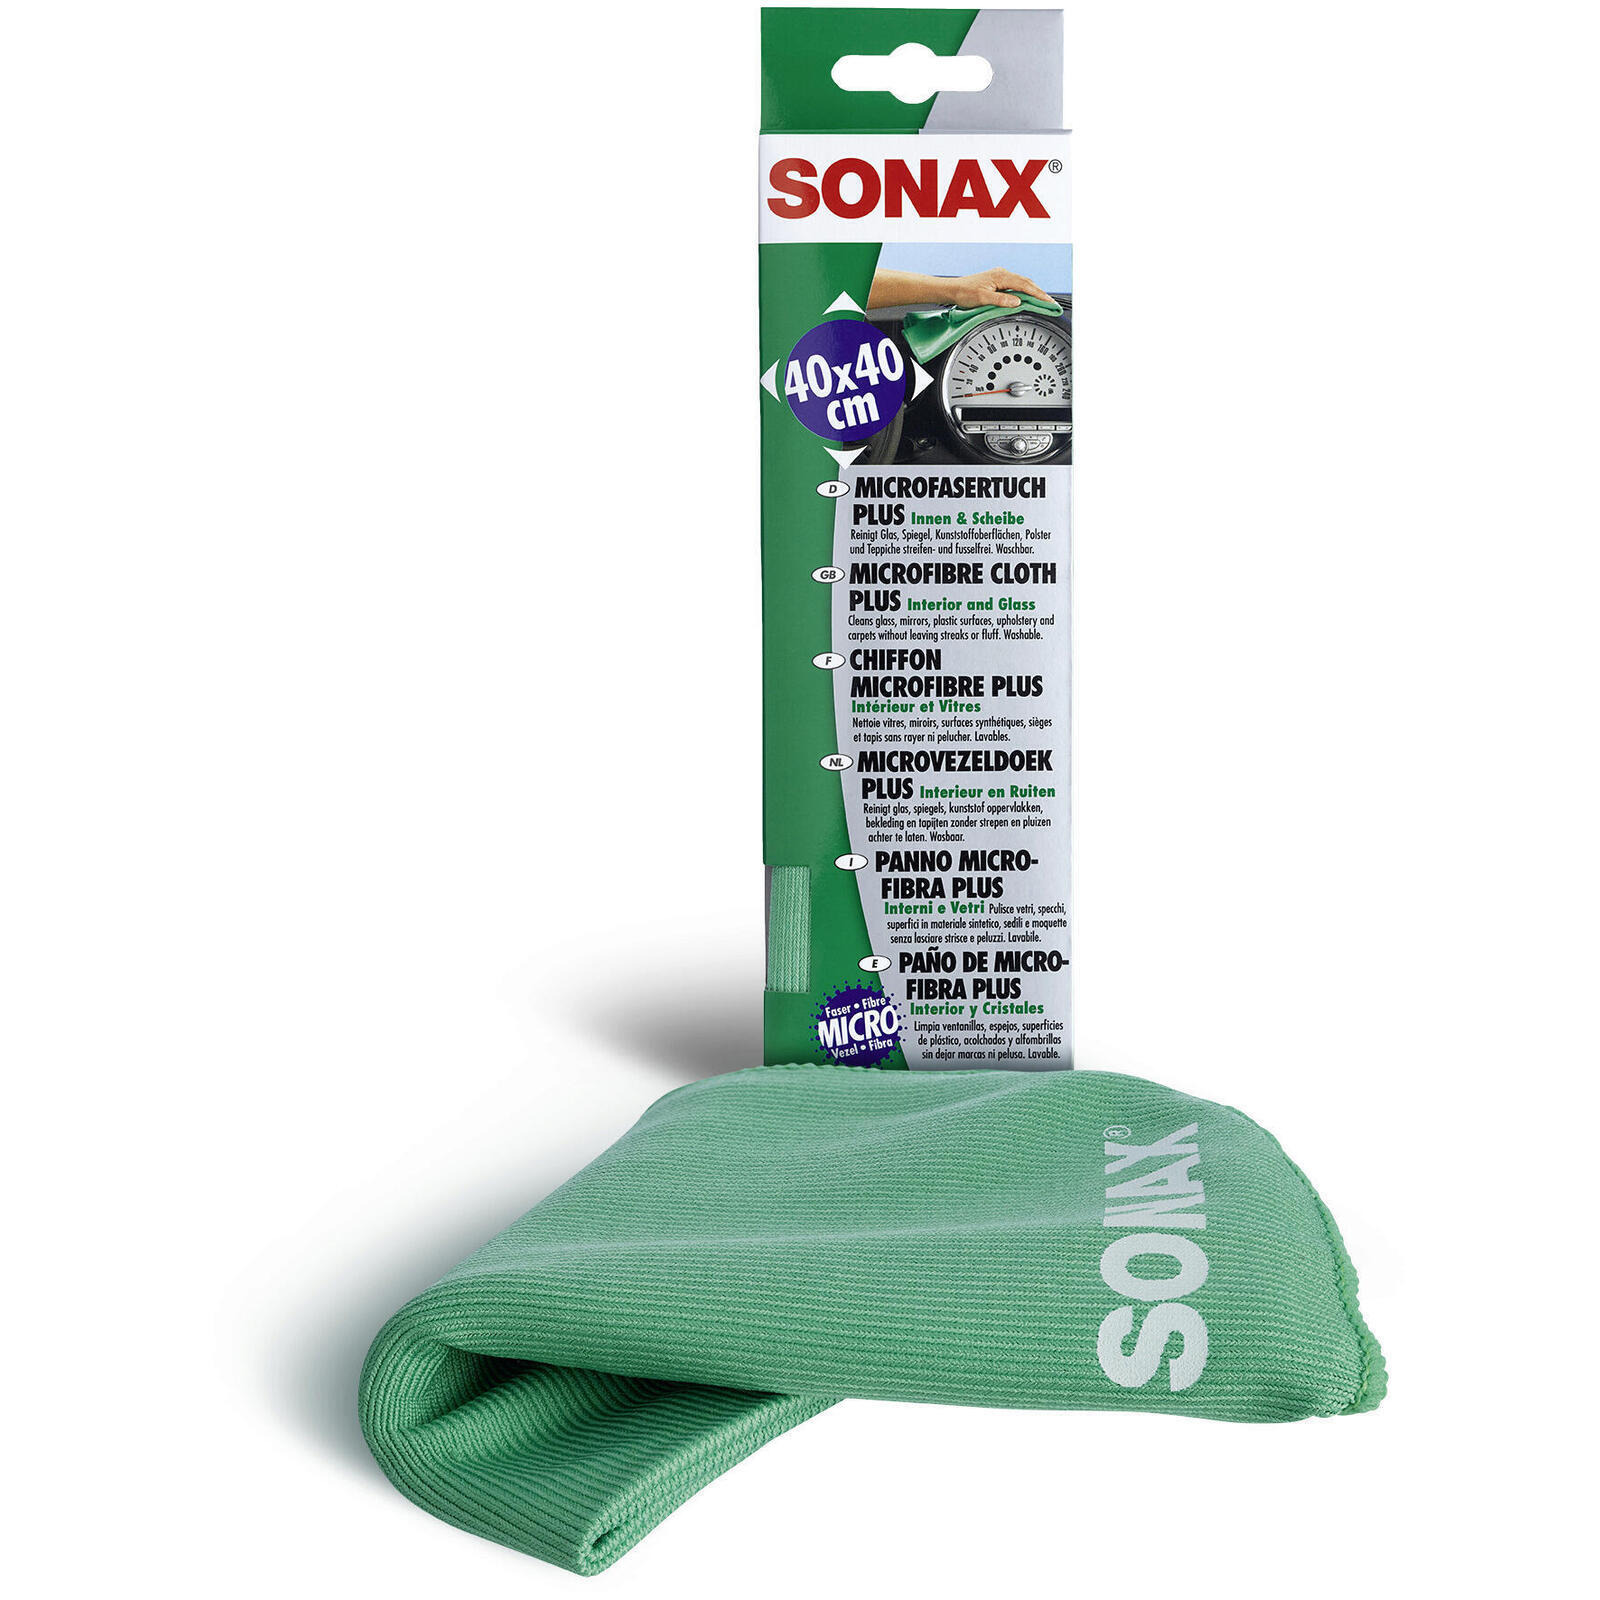 SONAX Cleaning Cloth Microfibre cloth PLUS interiors and glass